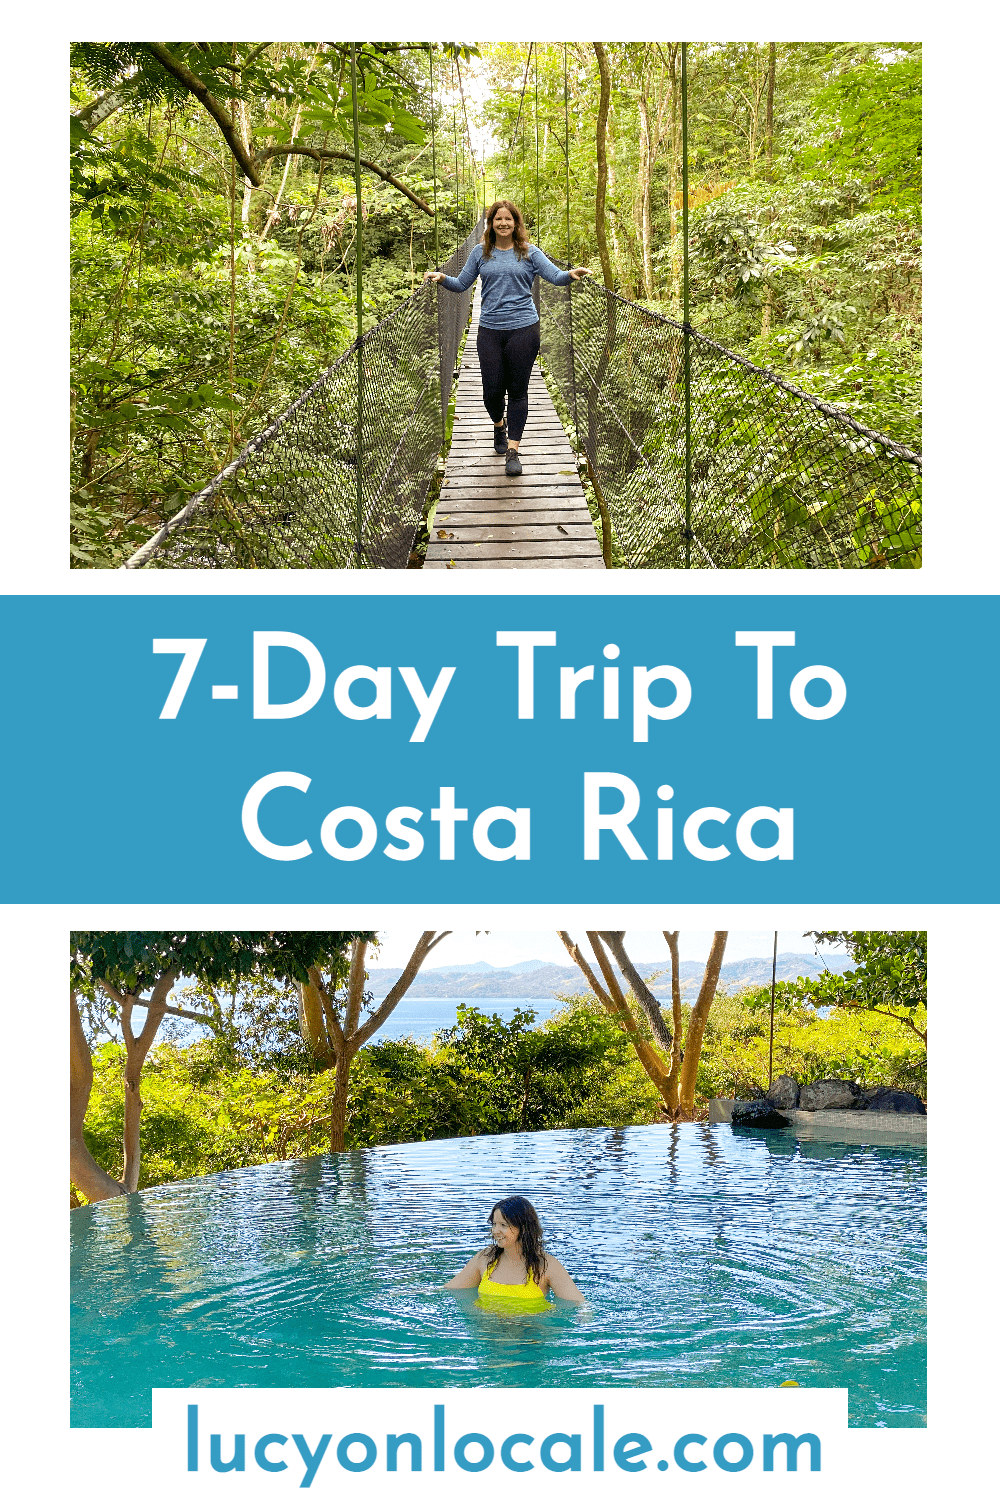 7-day trip to Costa Rica